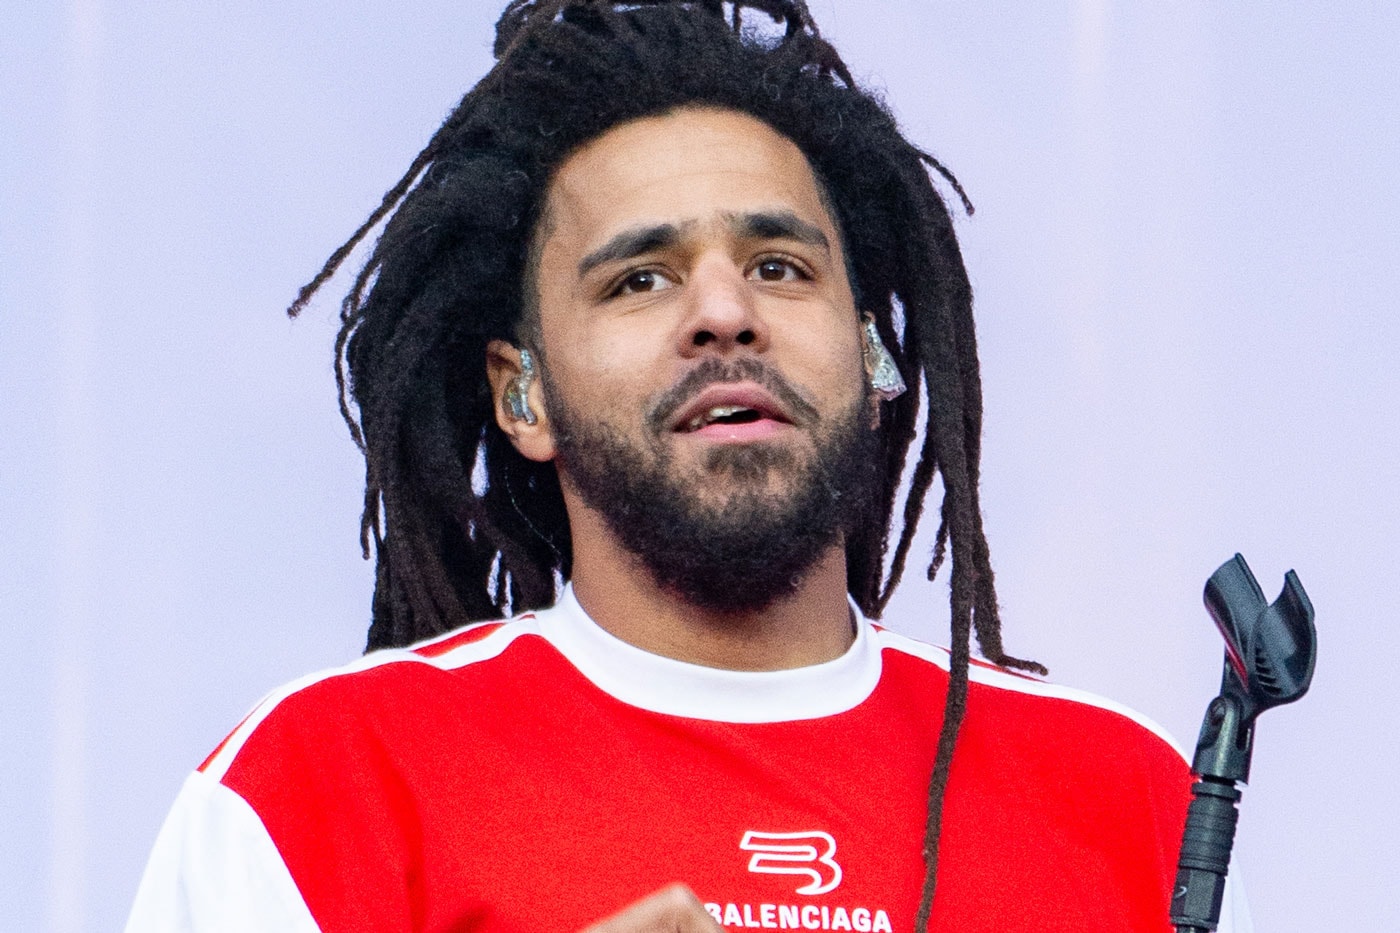 J. Cole's "Homecoming Concert" to Air on HBO